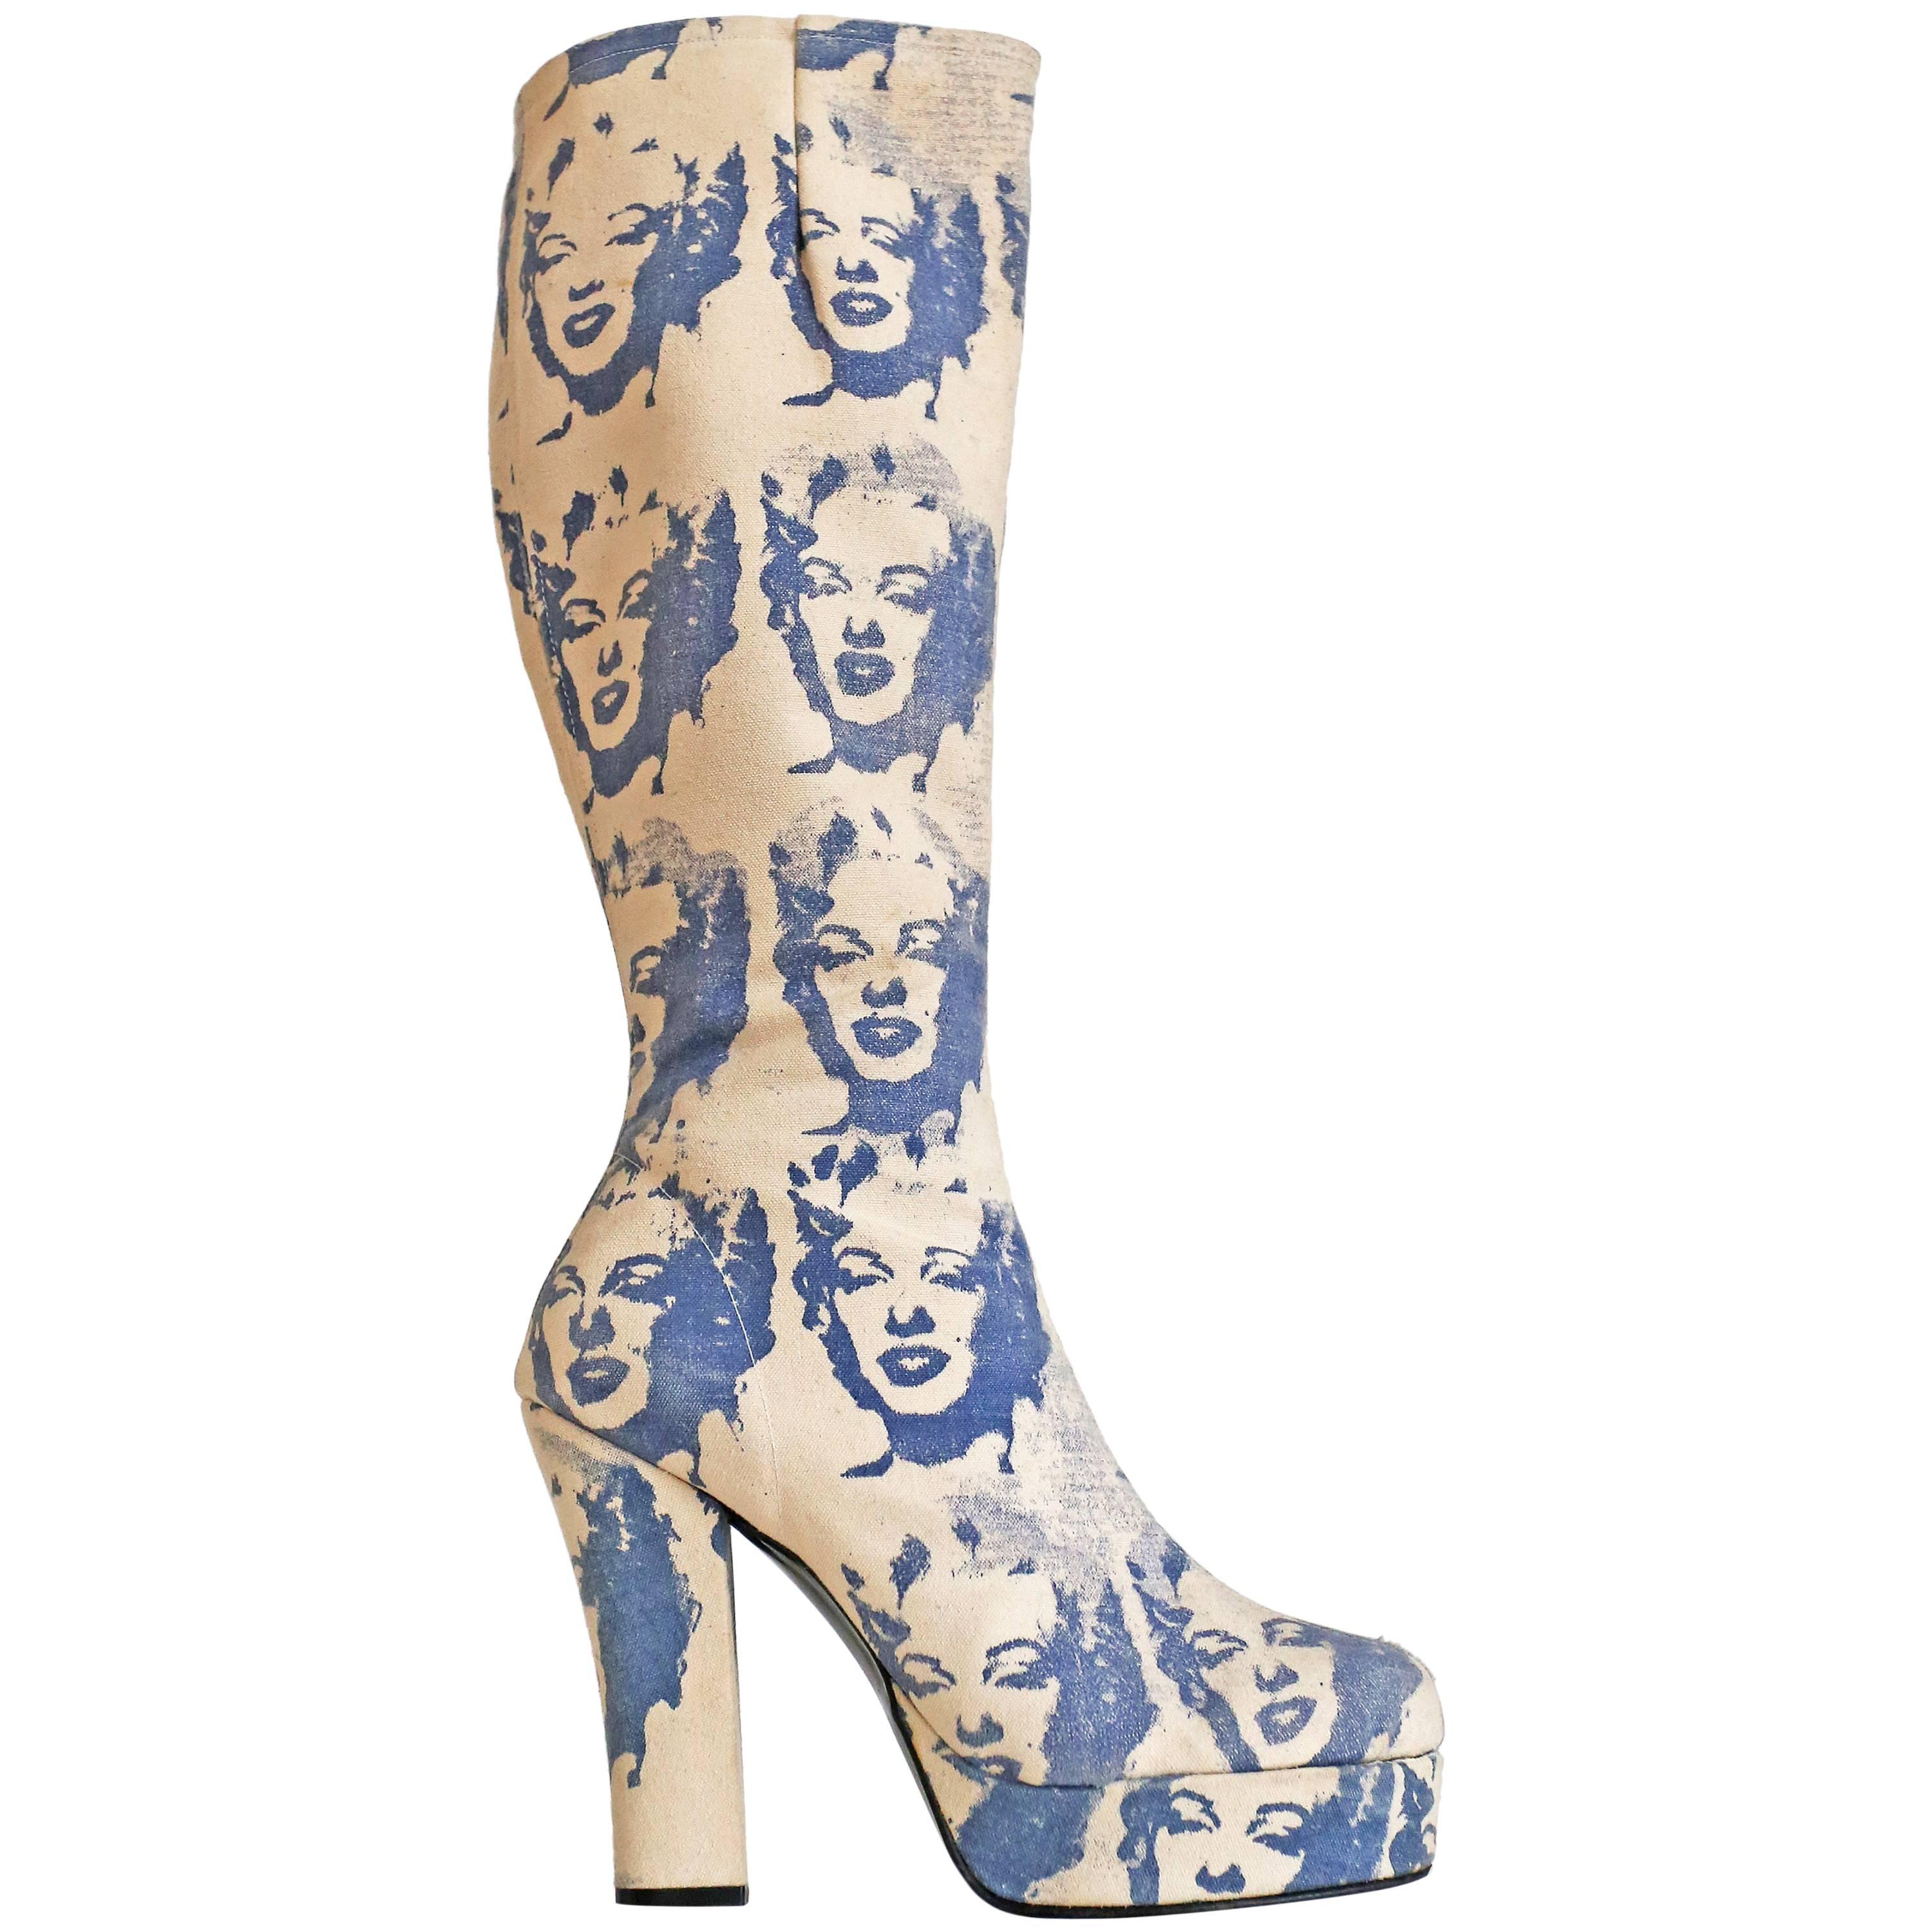 Platform boots with screen printed Andy Warhol Marilyn Diptych print, c. 1960s For Sale